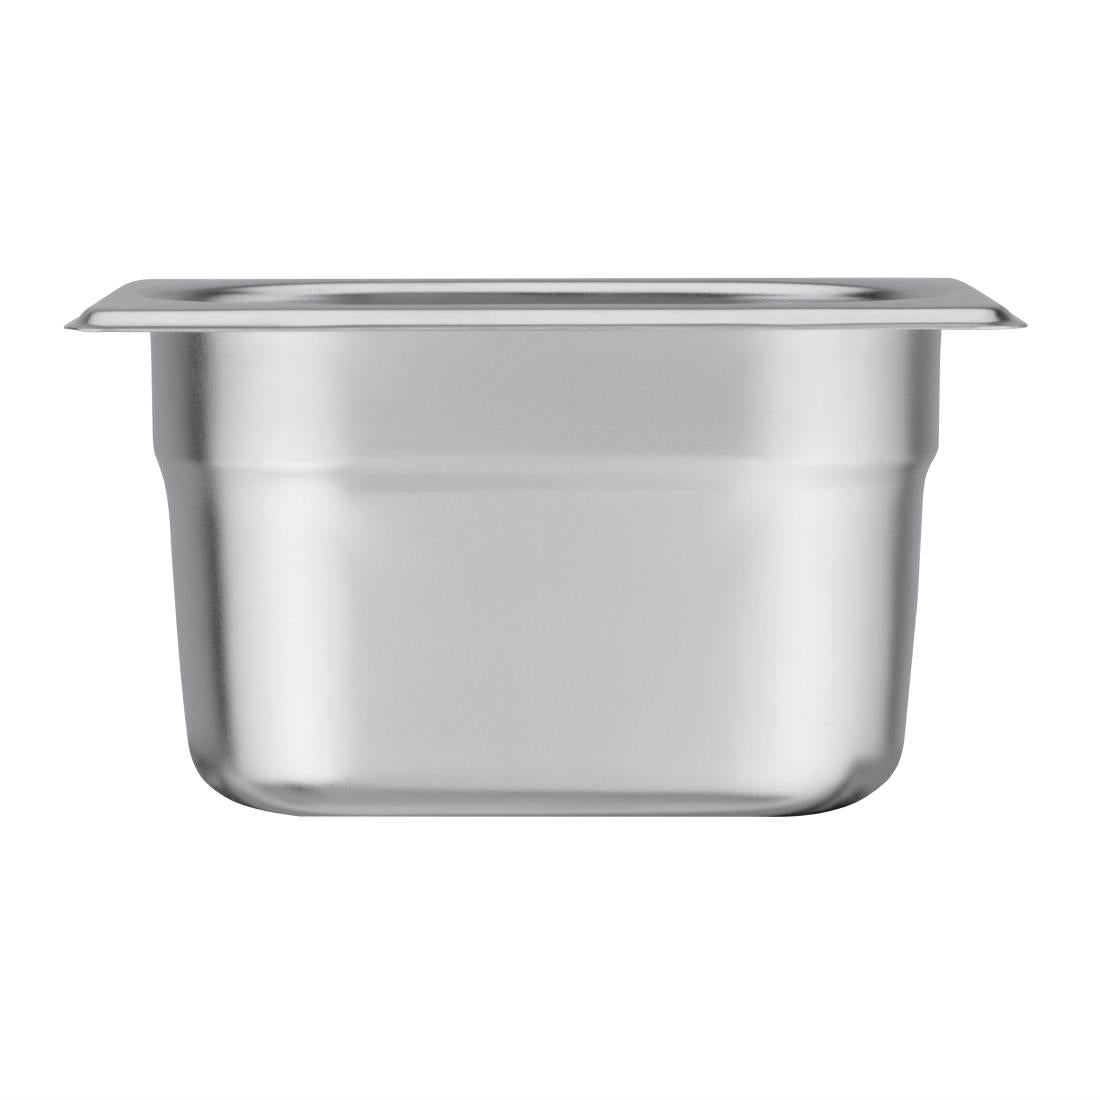 Vogue Stainless Steel 1/9 Gastronorm Pan 100mm